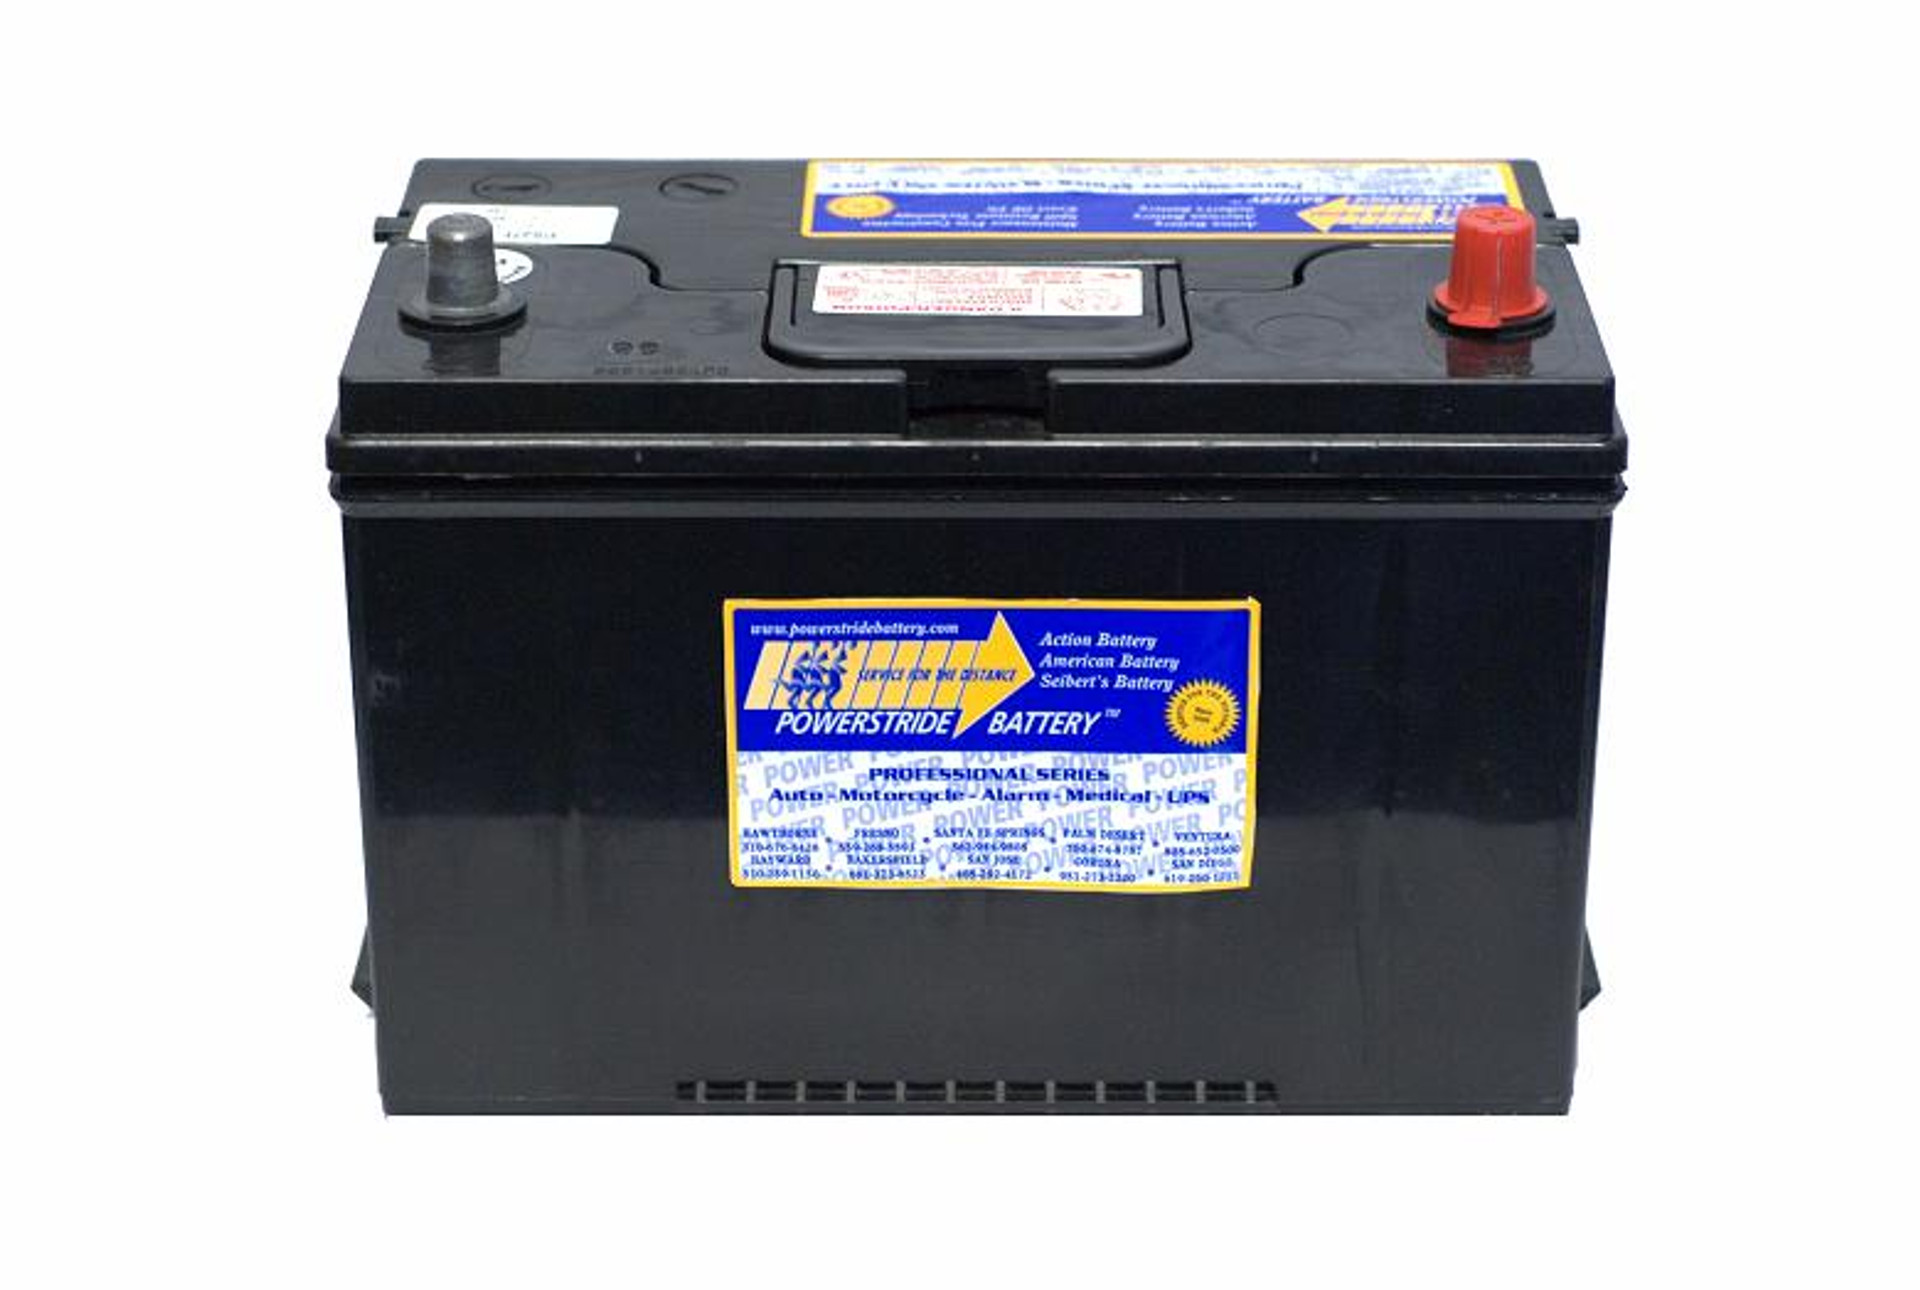 Powerstride - Toyota Tundra Battery (2006-2002, V8 4.7L Cold Climate or